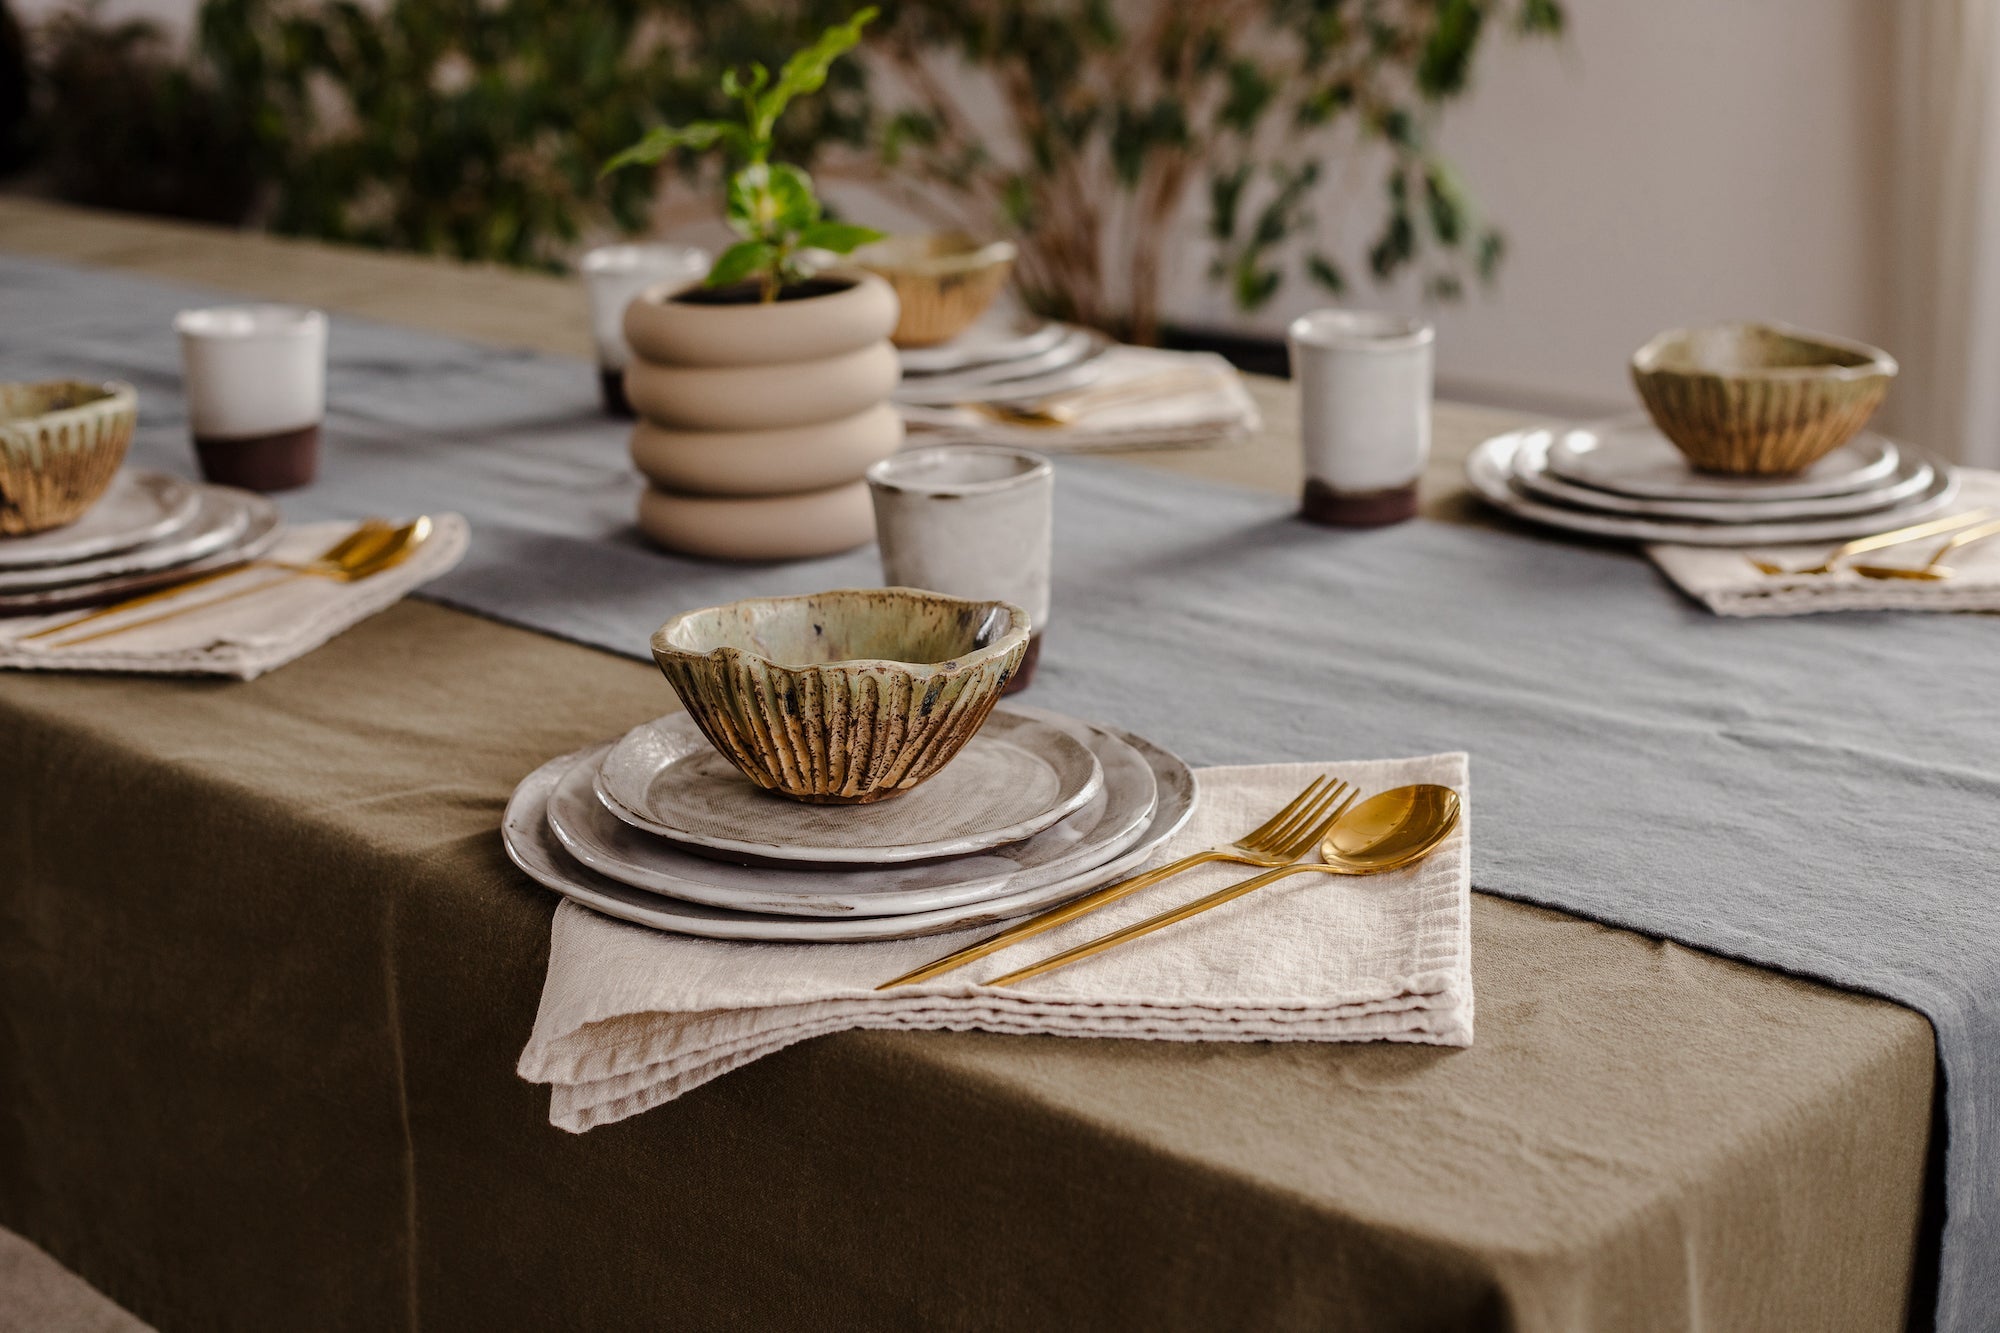 Table setting with linen tablecloth, runner, and napkins